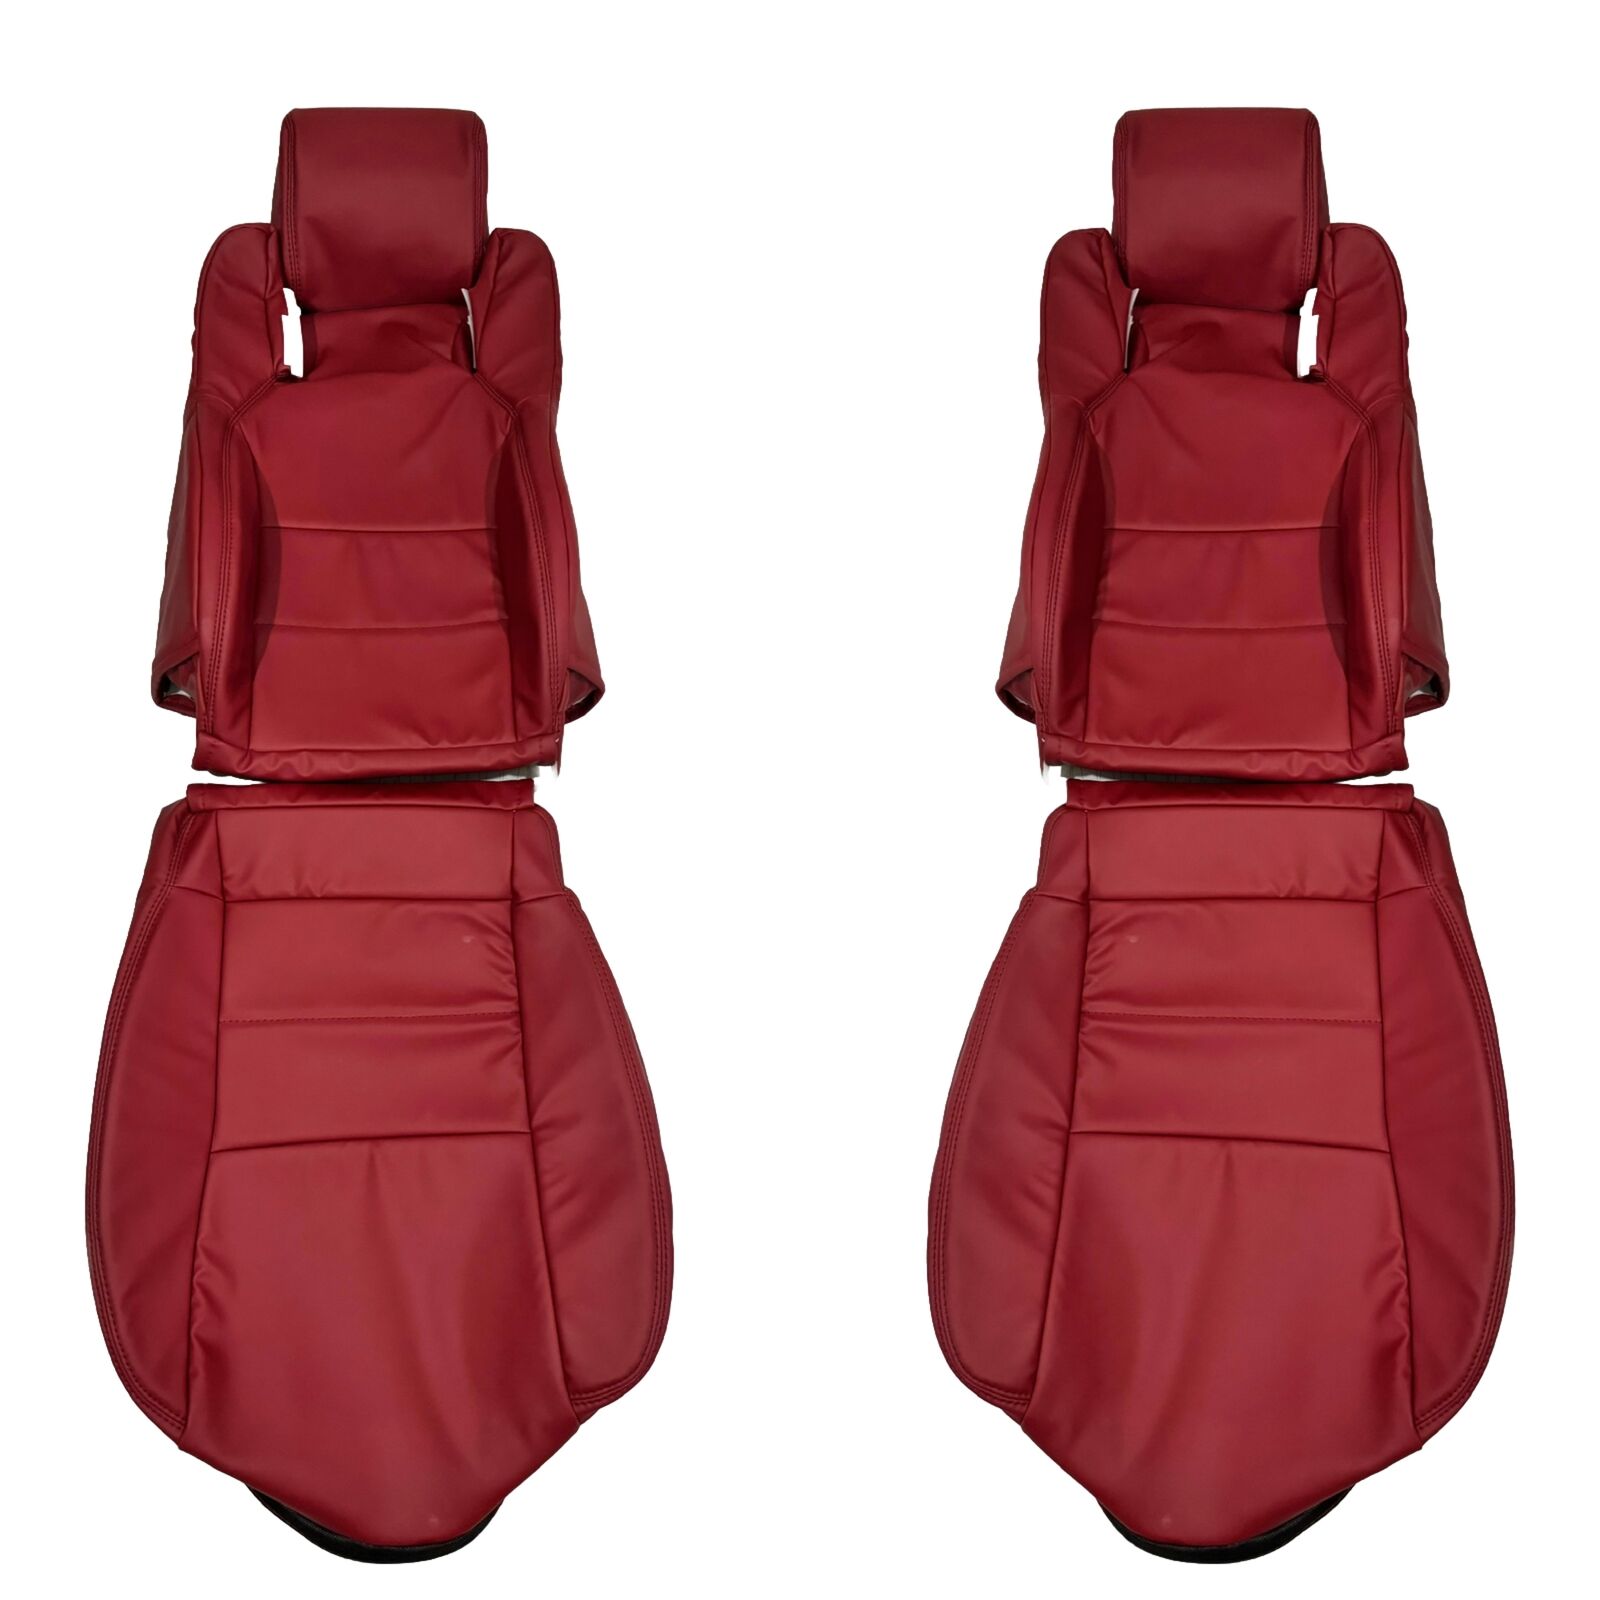 Toyota Supra MK3 / MKIII 1986.5-1992 Synthetic Leather Seat Covers In Dark Red